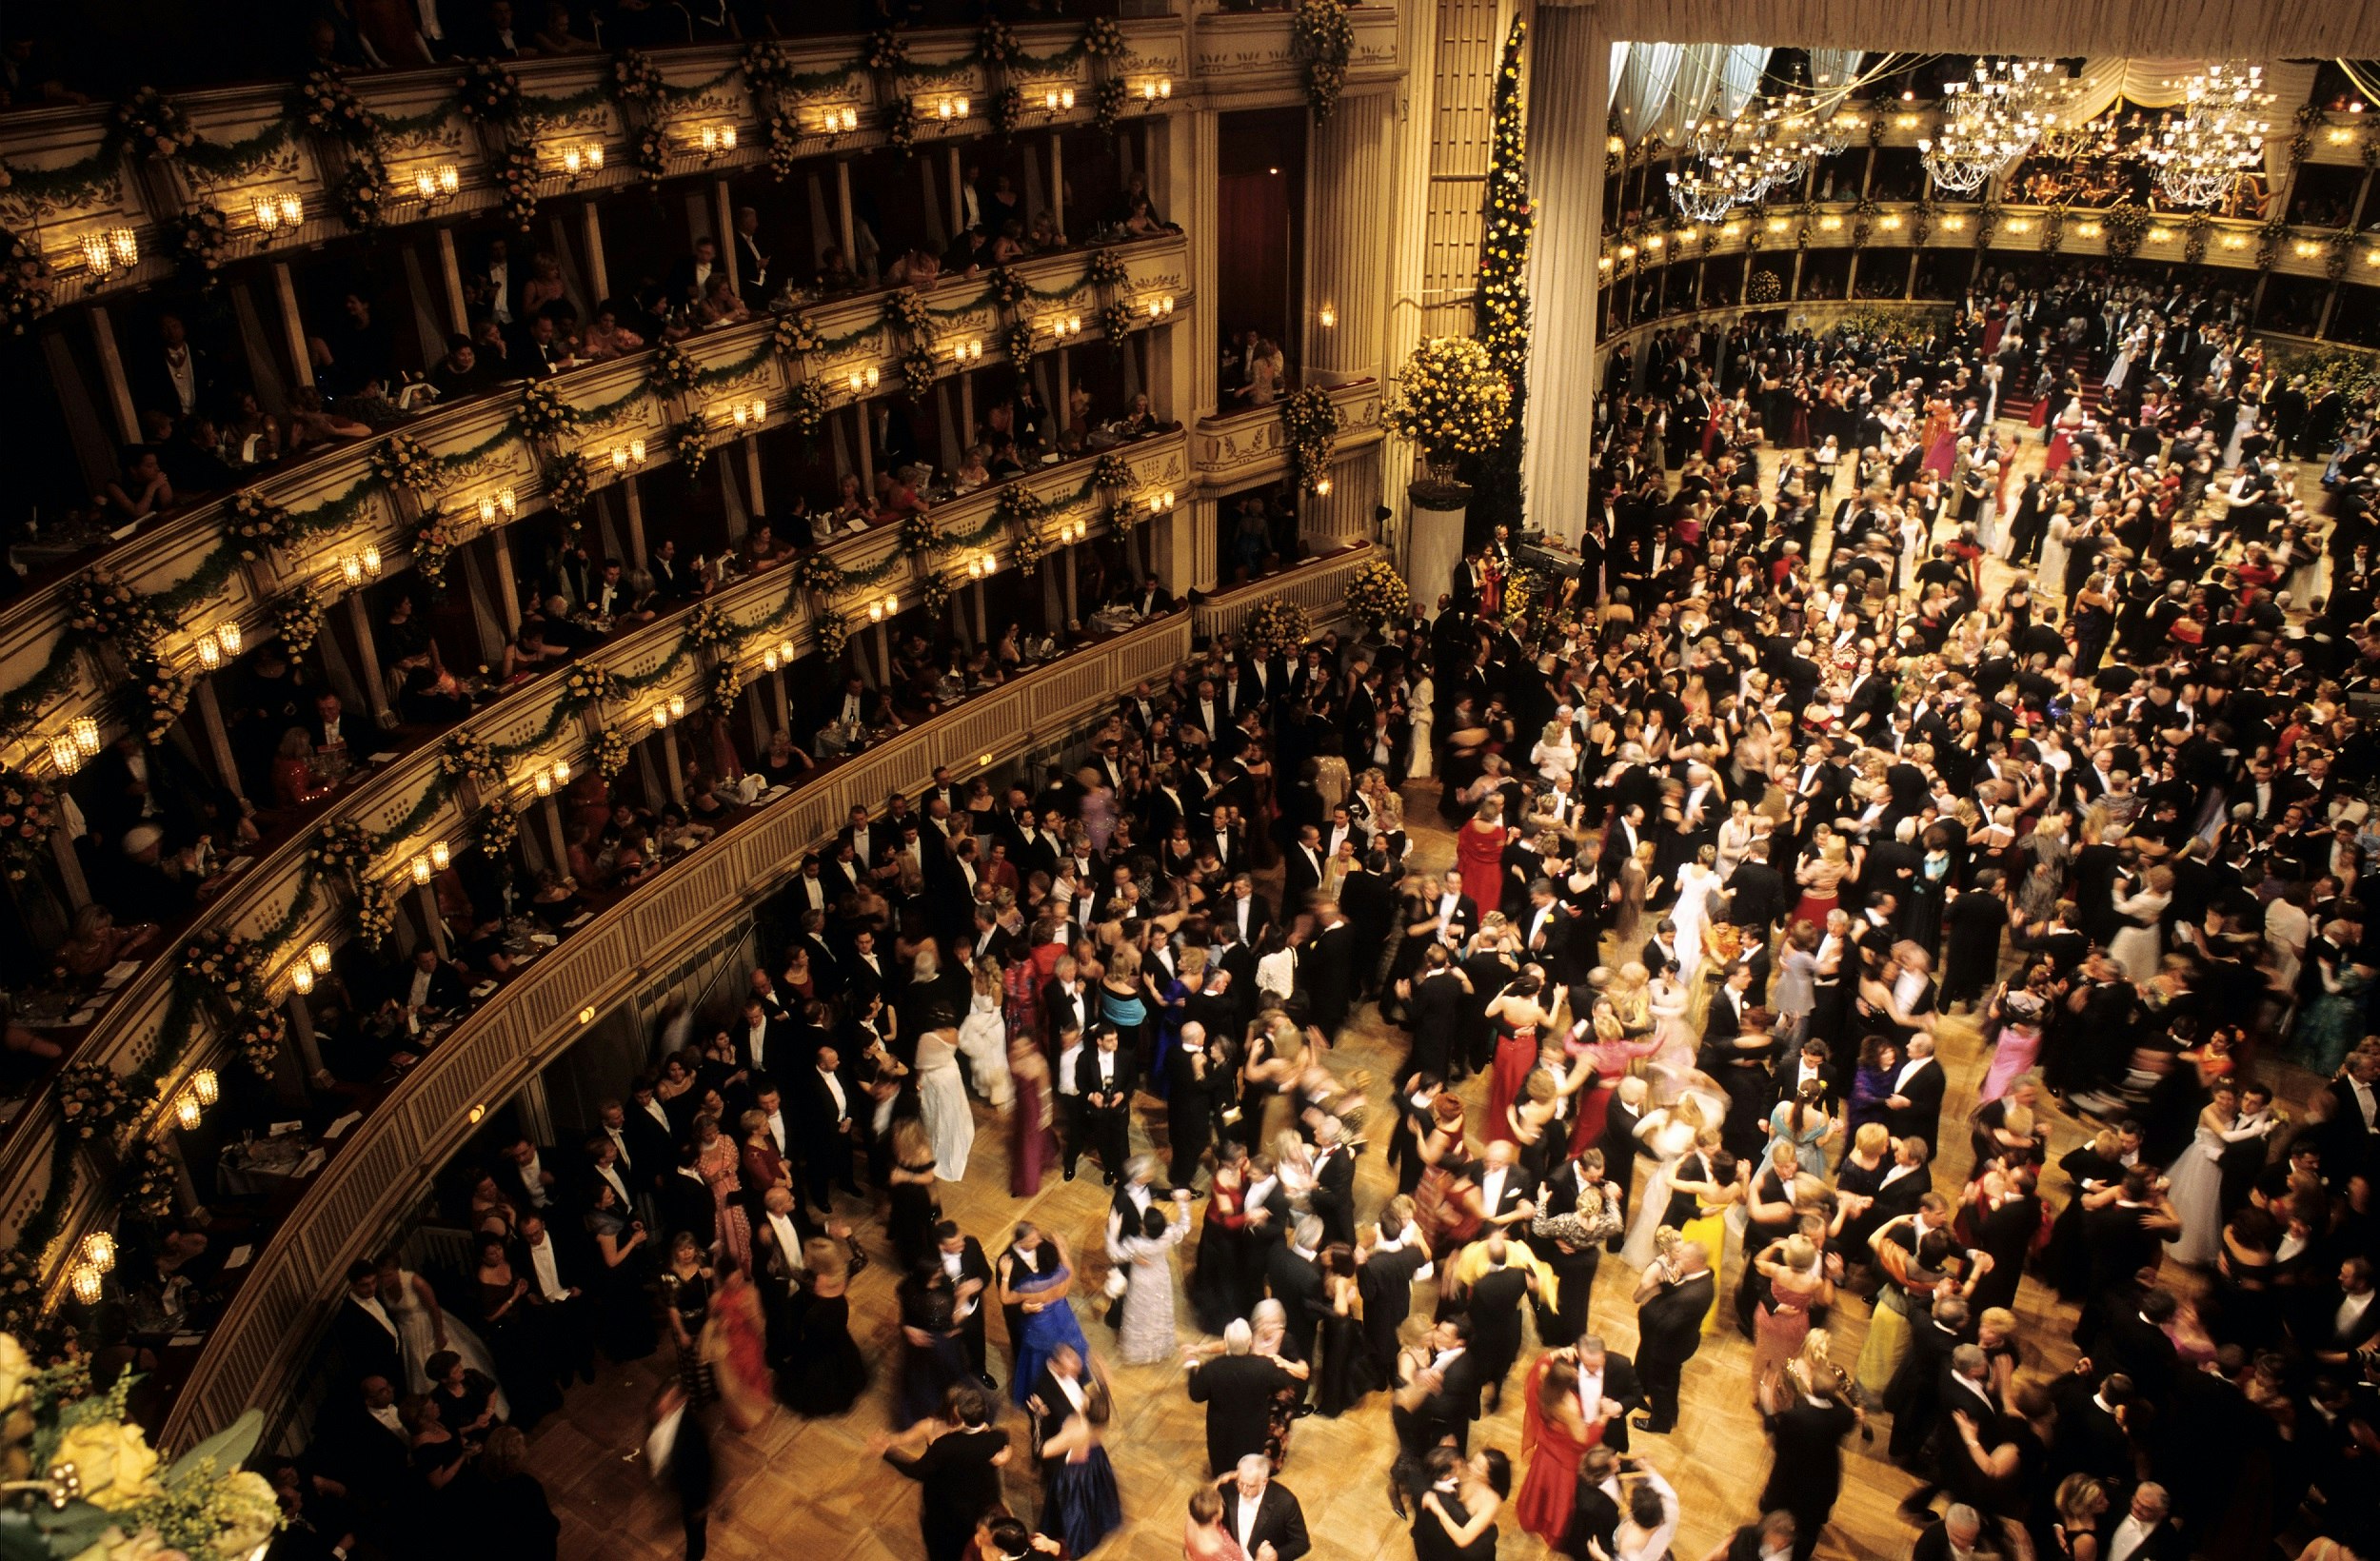 A shot downwards onto a busy ballroom dance floor, packed with couples dancing together. Men are wearing dark suits; women are in evening dresses of many different colours. Balcony boxes are full of people, and chandeliers hang from the ceiling